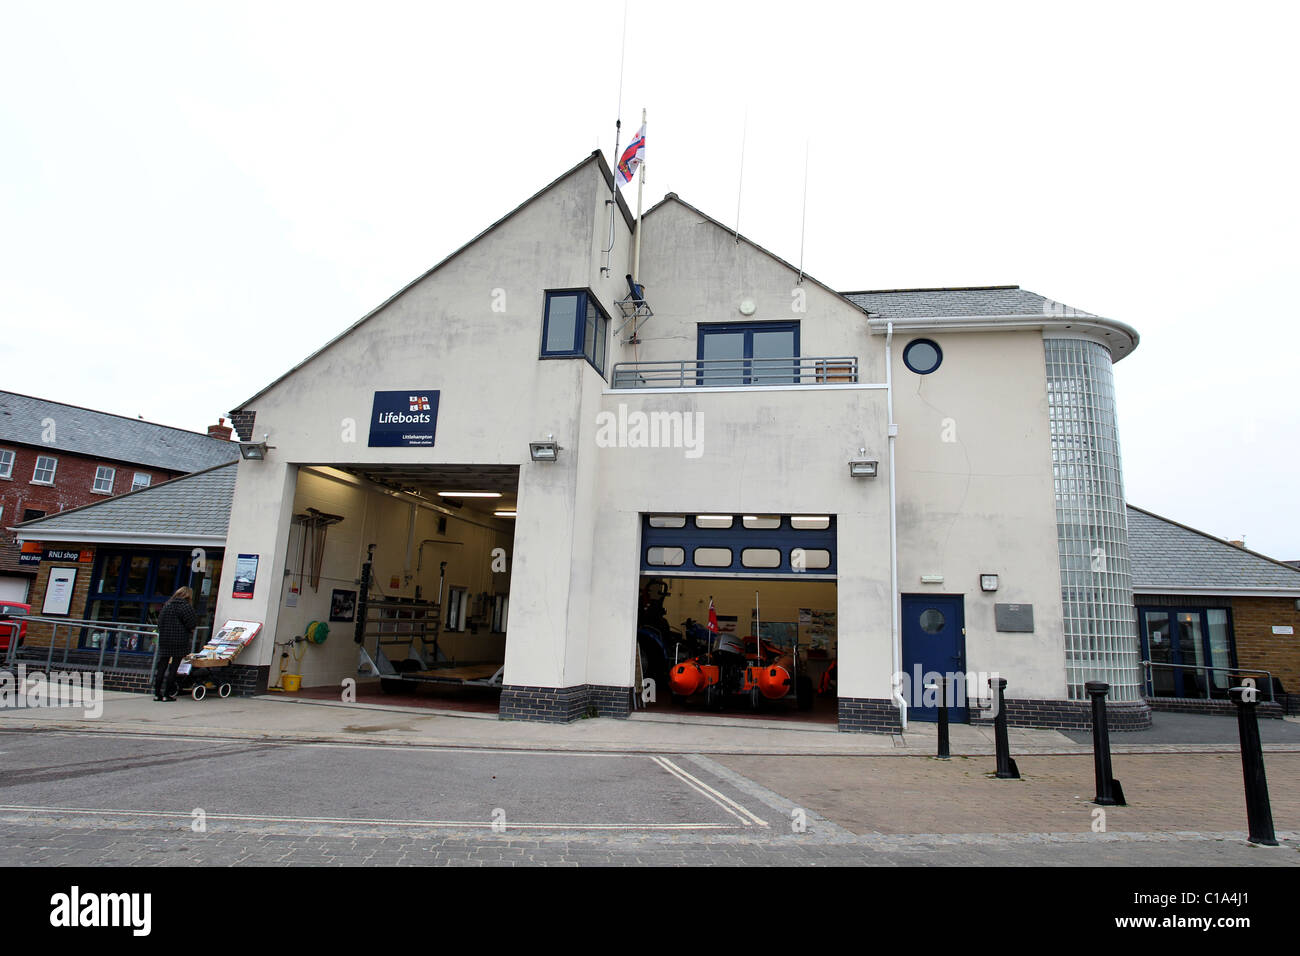 RNLI Lifeboat pictured on its trailer in a Lifeboat station in Littlehampton, West Sussex, UK. Stock Photo